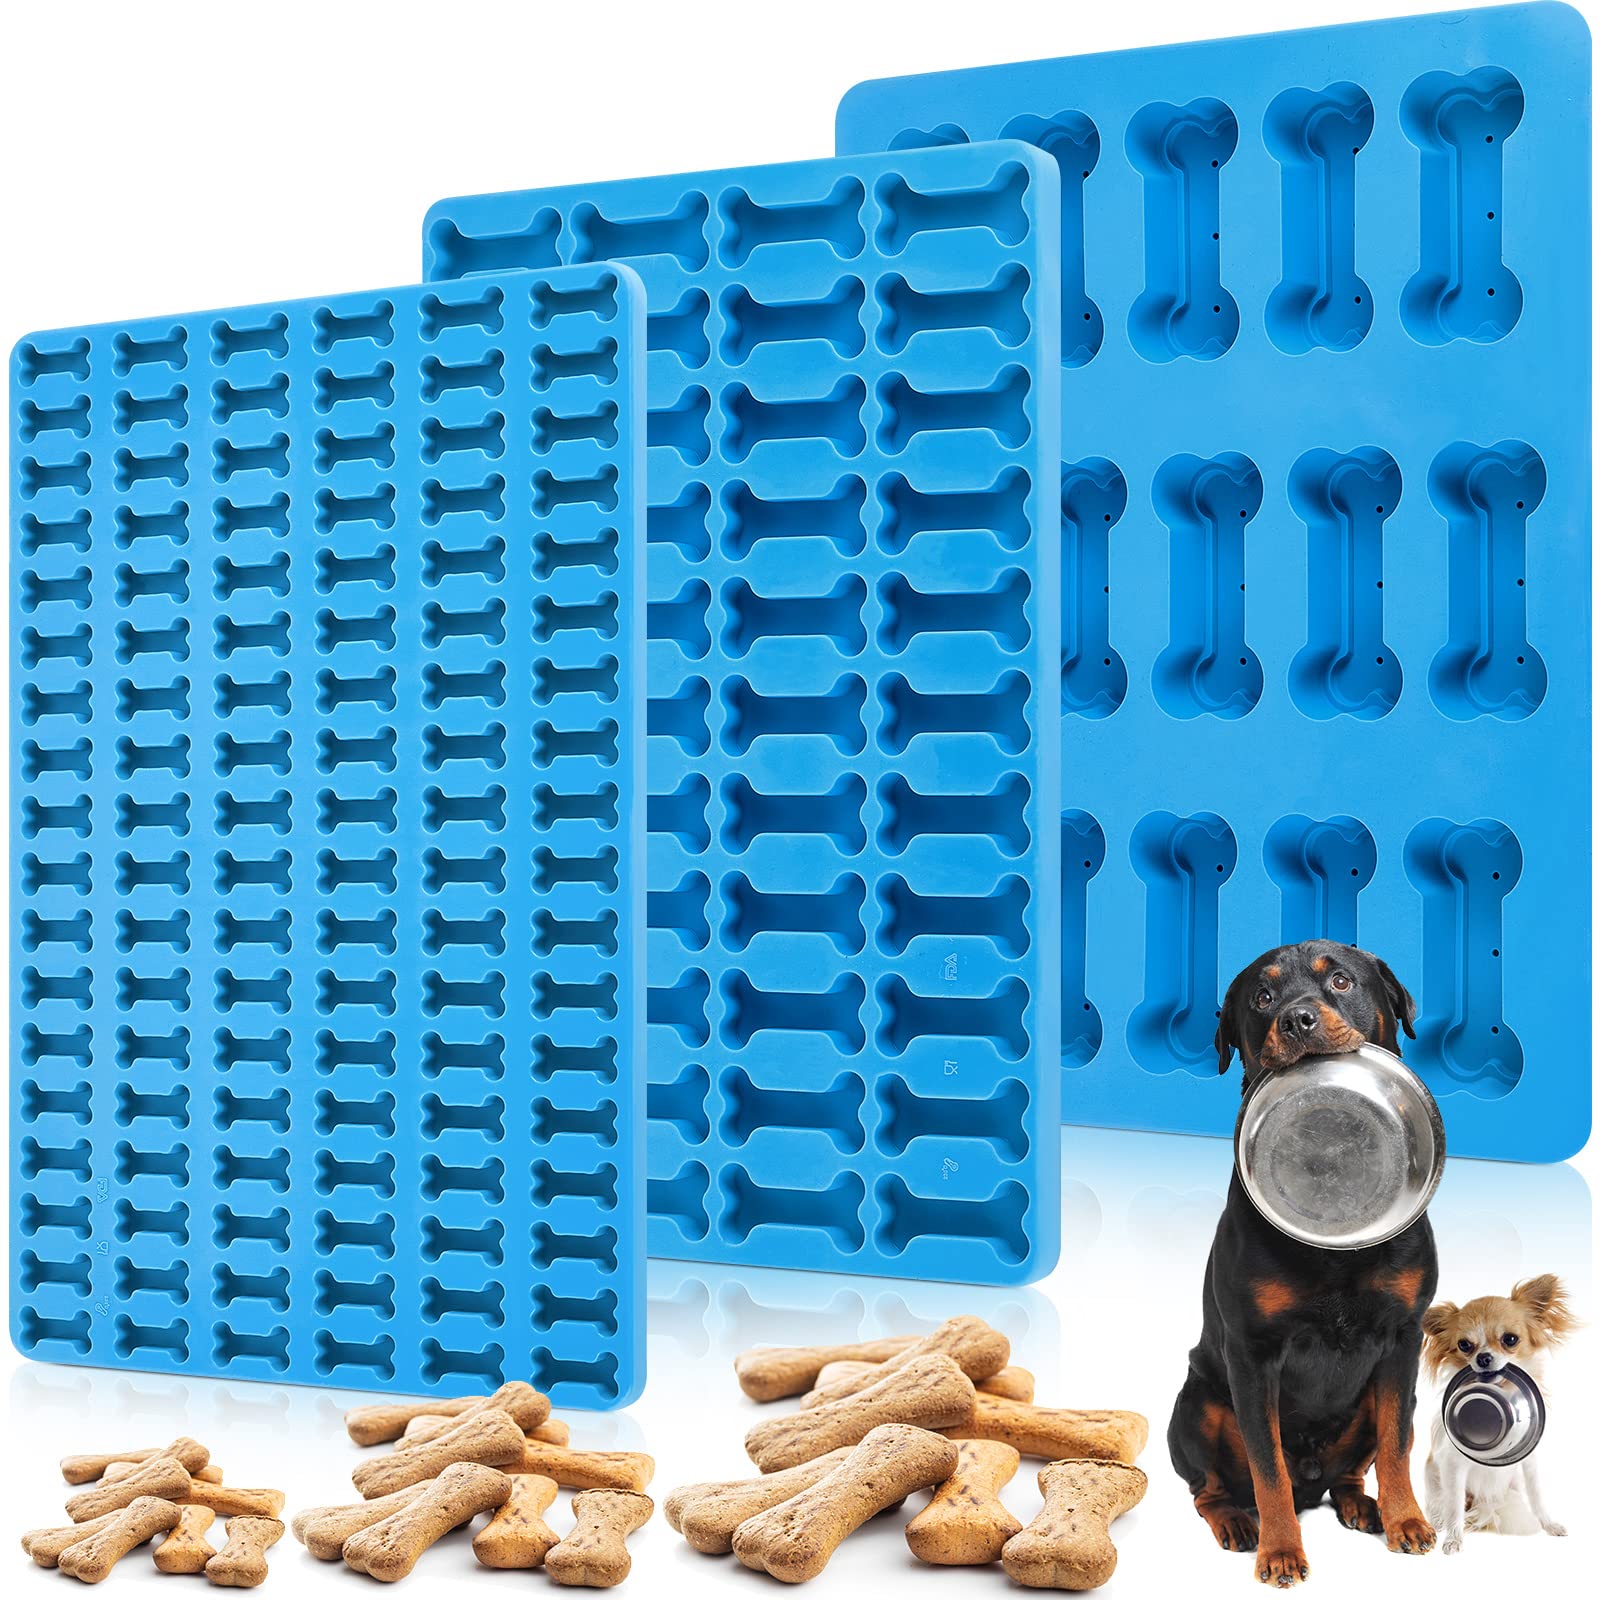 Dog Treat Molds for Baking and Freezing 3 Pcs 15, 44, 108 Cavity Dog Bone Silicone Mold Blue Non Stick Dog Biscuit Molds for Biscuits Pudding Chocolate Cookie Candy, Oven Microwave Freezer Safe